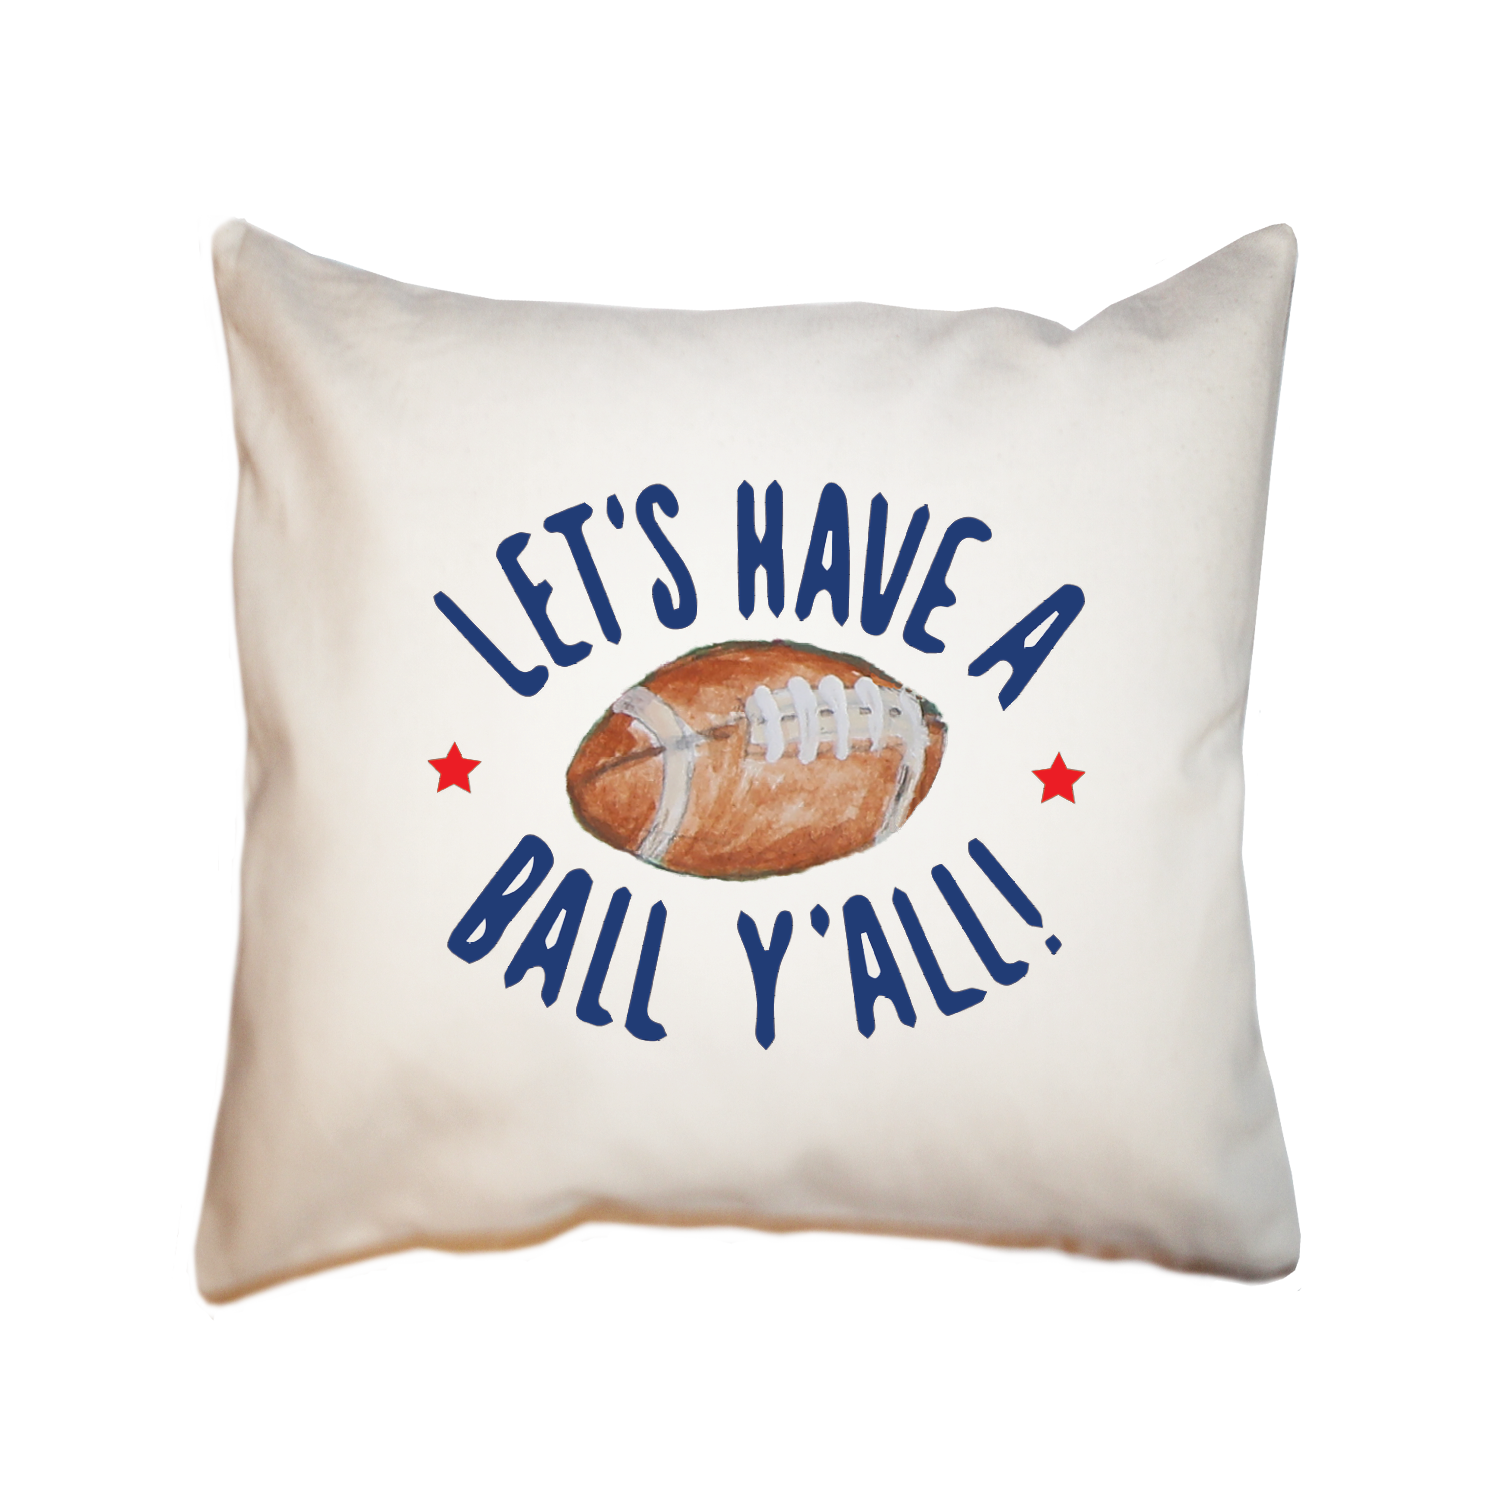 have a ball y'all square pillow